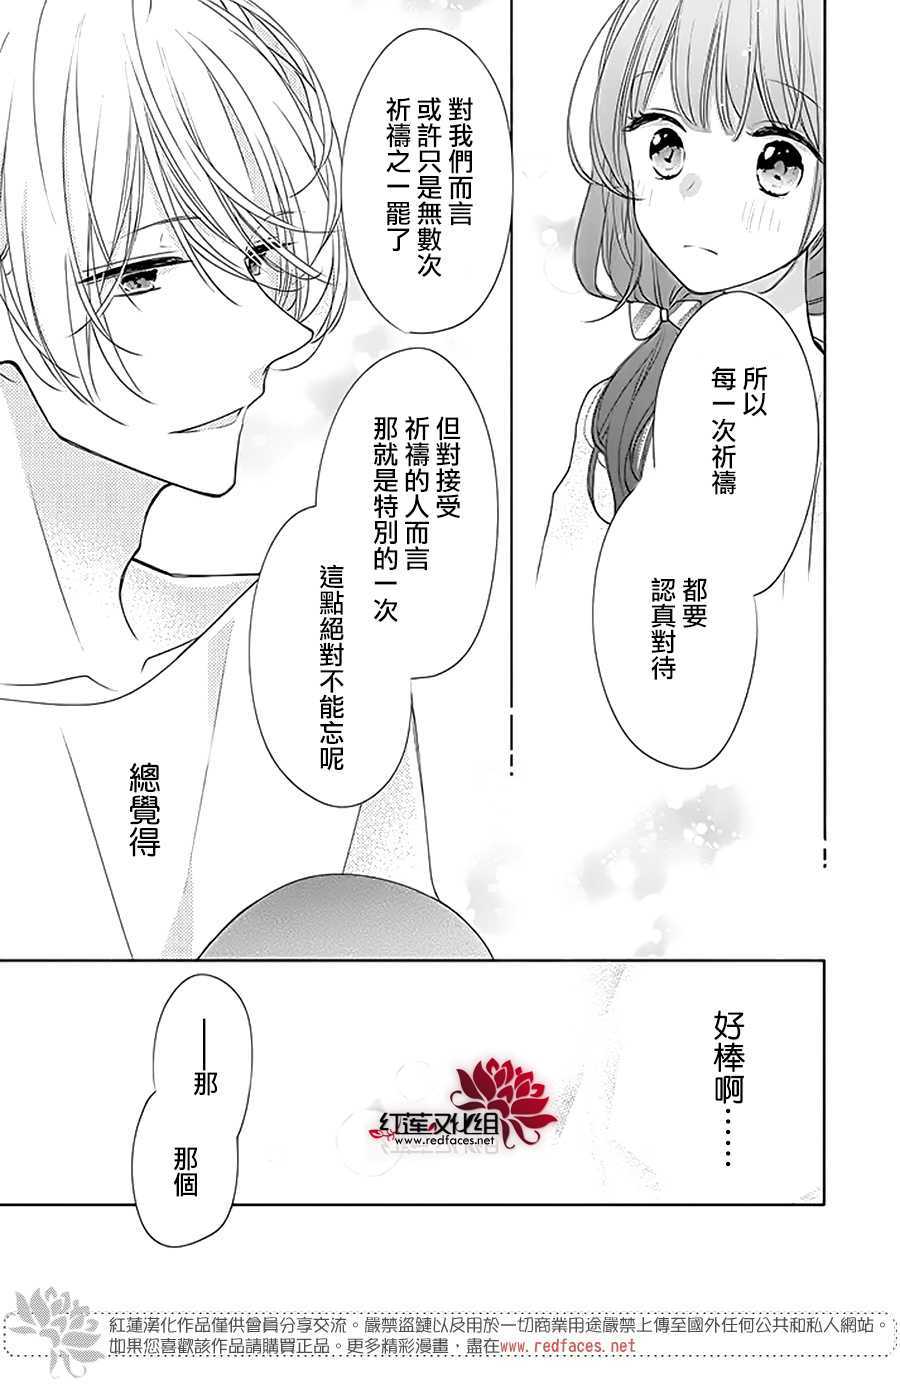 If given a second chance - 30話 - 3